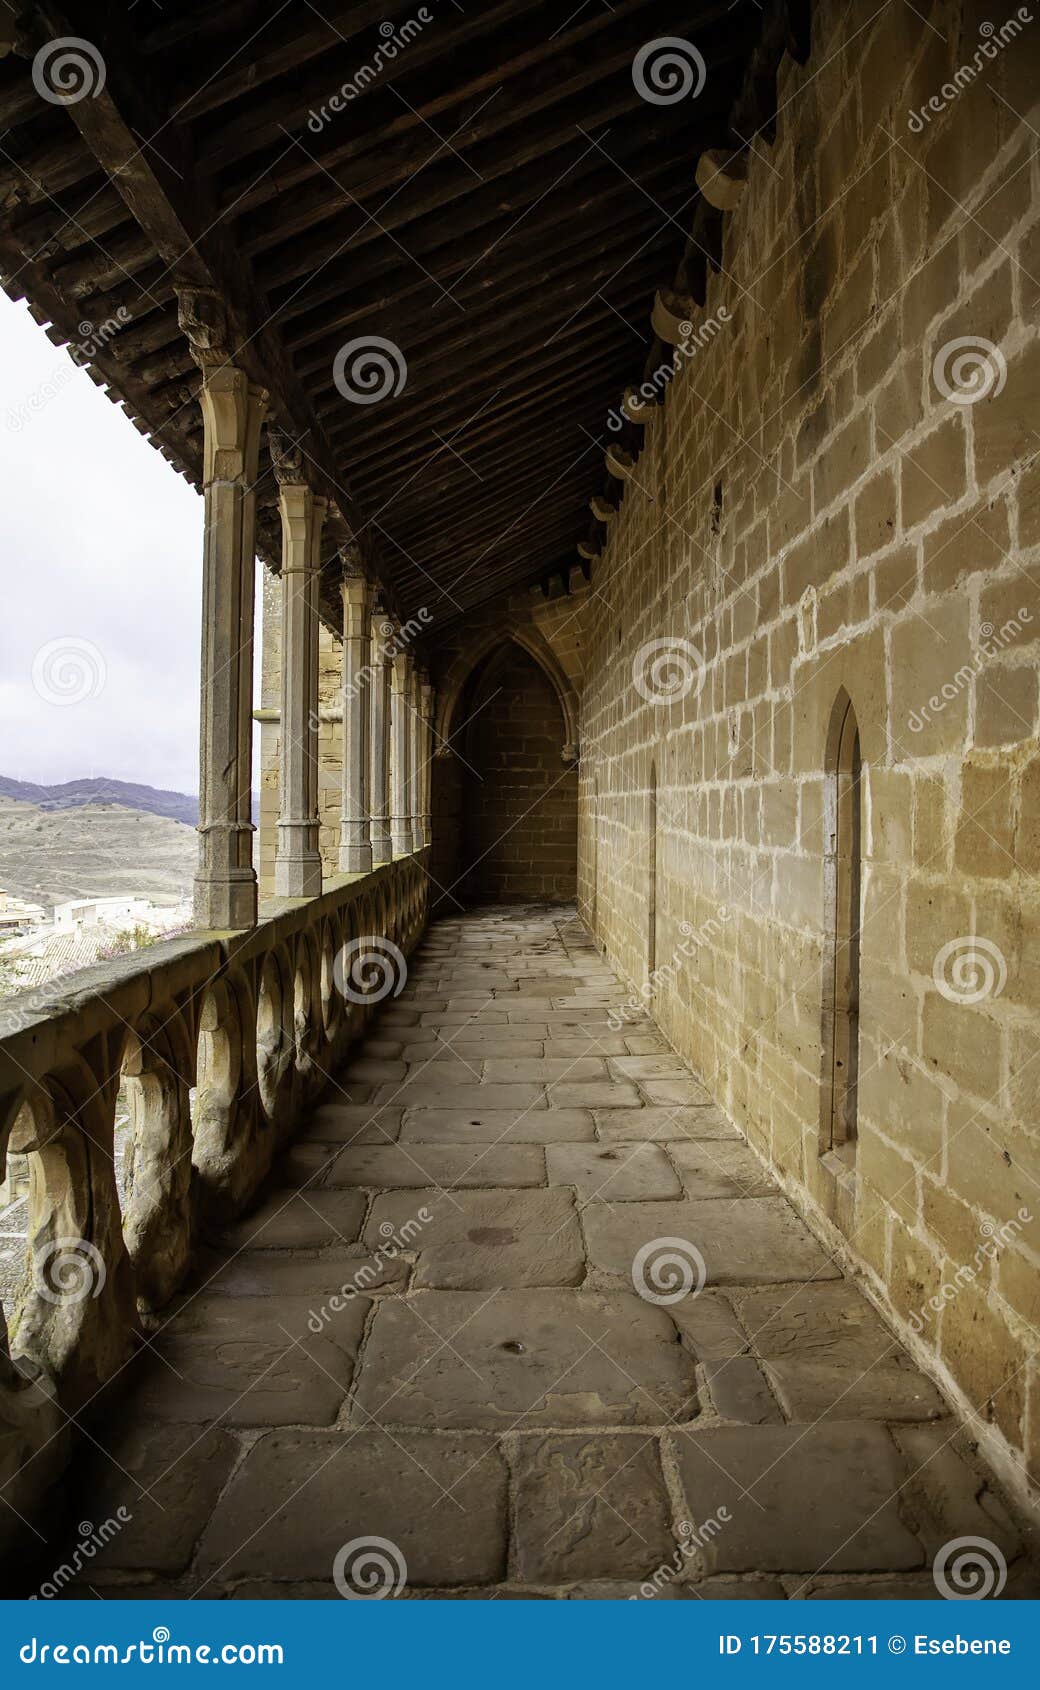 Old Castle Interior Stock Image Image Of Building Antique